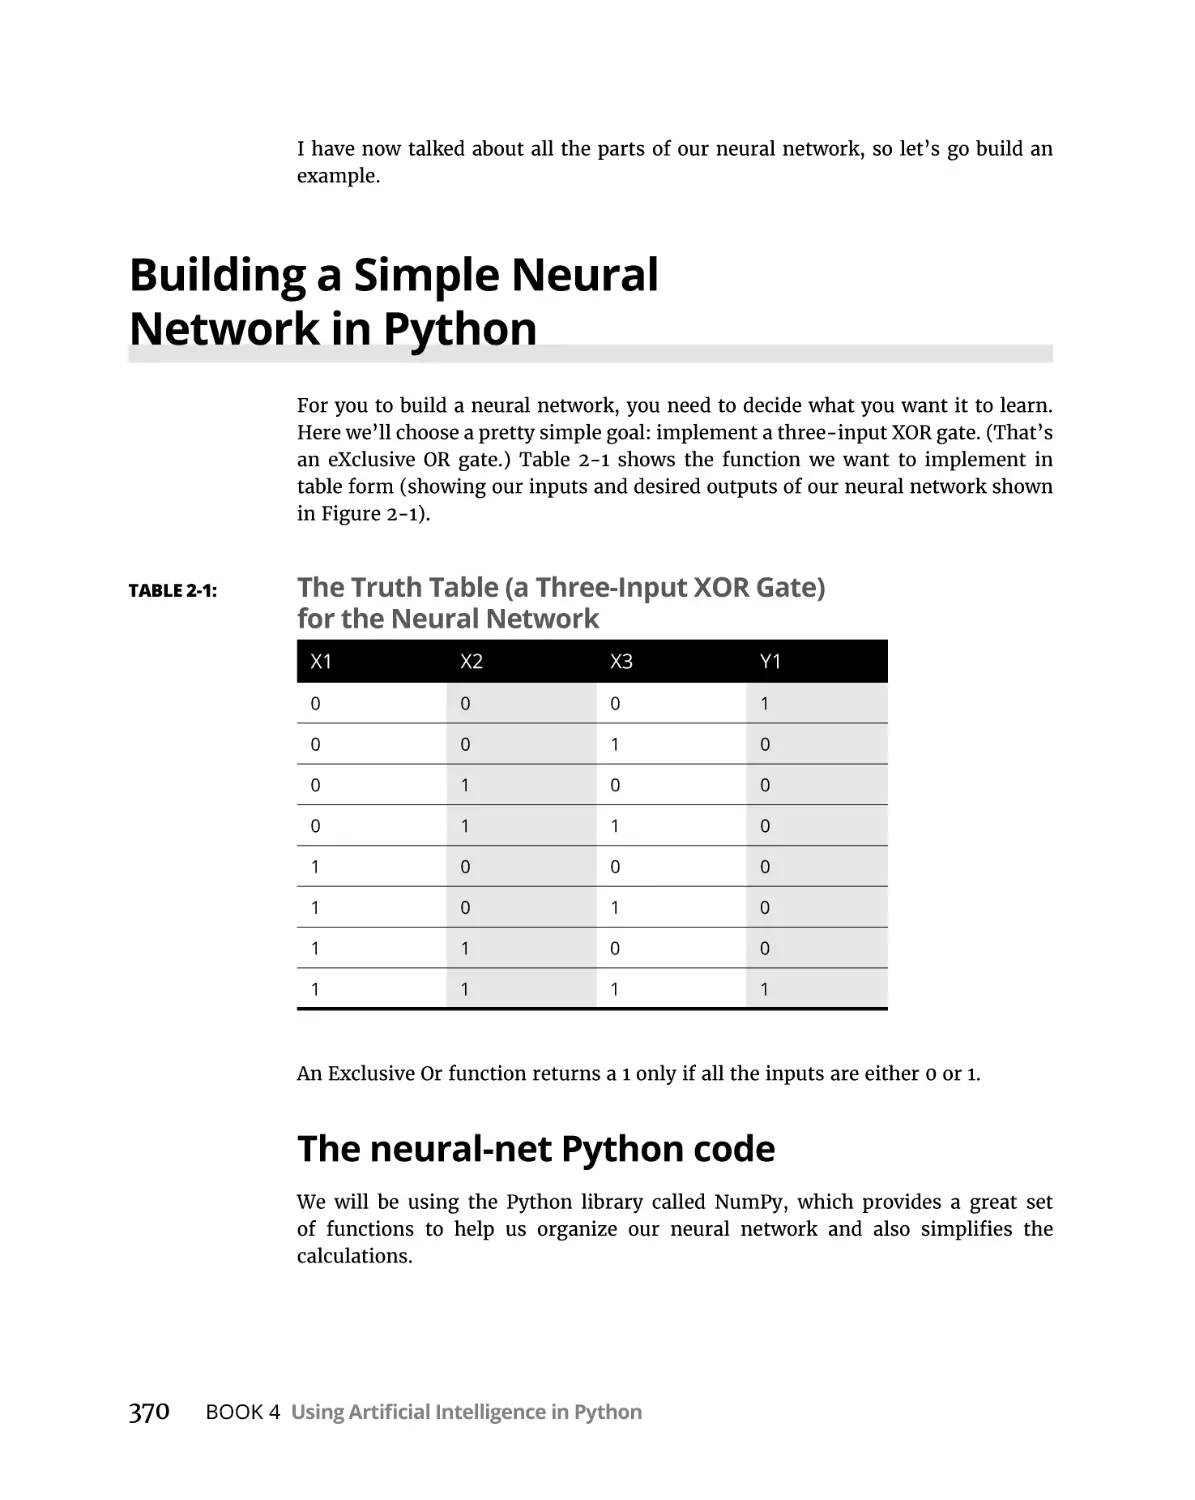 Building a Simple Neural Network in Python
The neural-net Python code